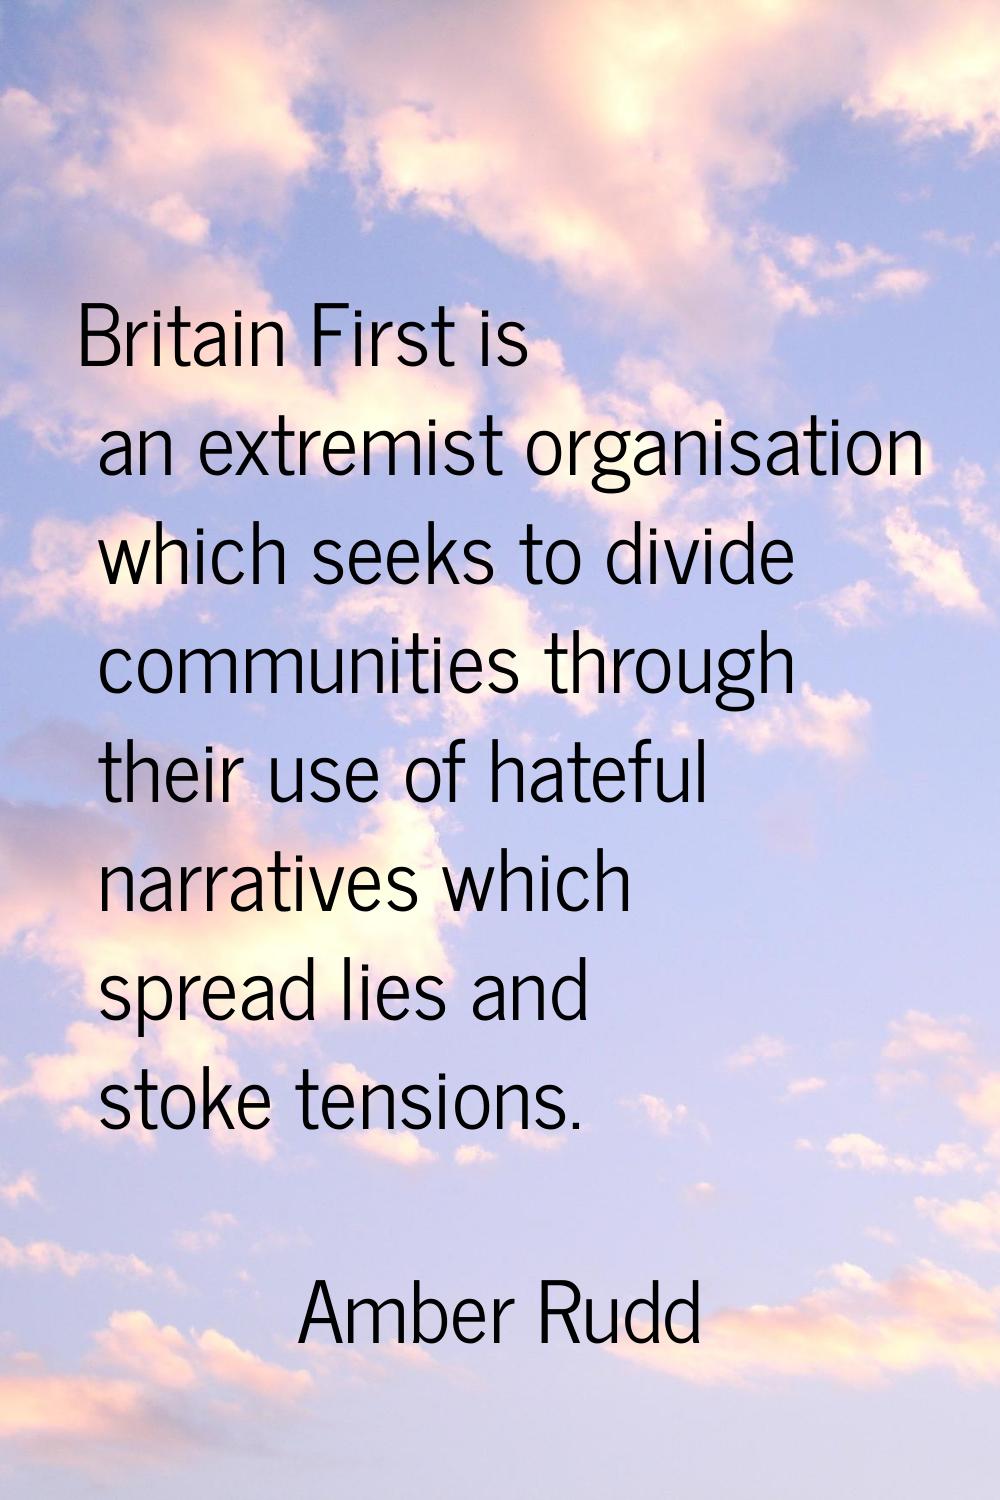 Britain First is an extremist organisation which seeks to divide communities through their use of h